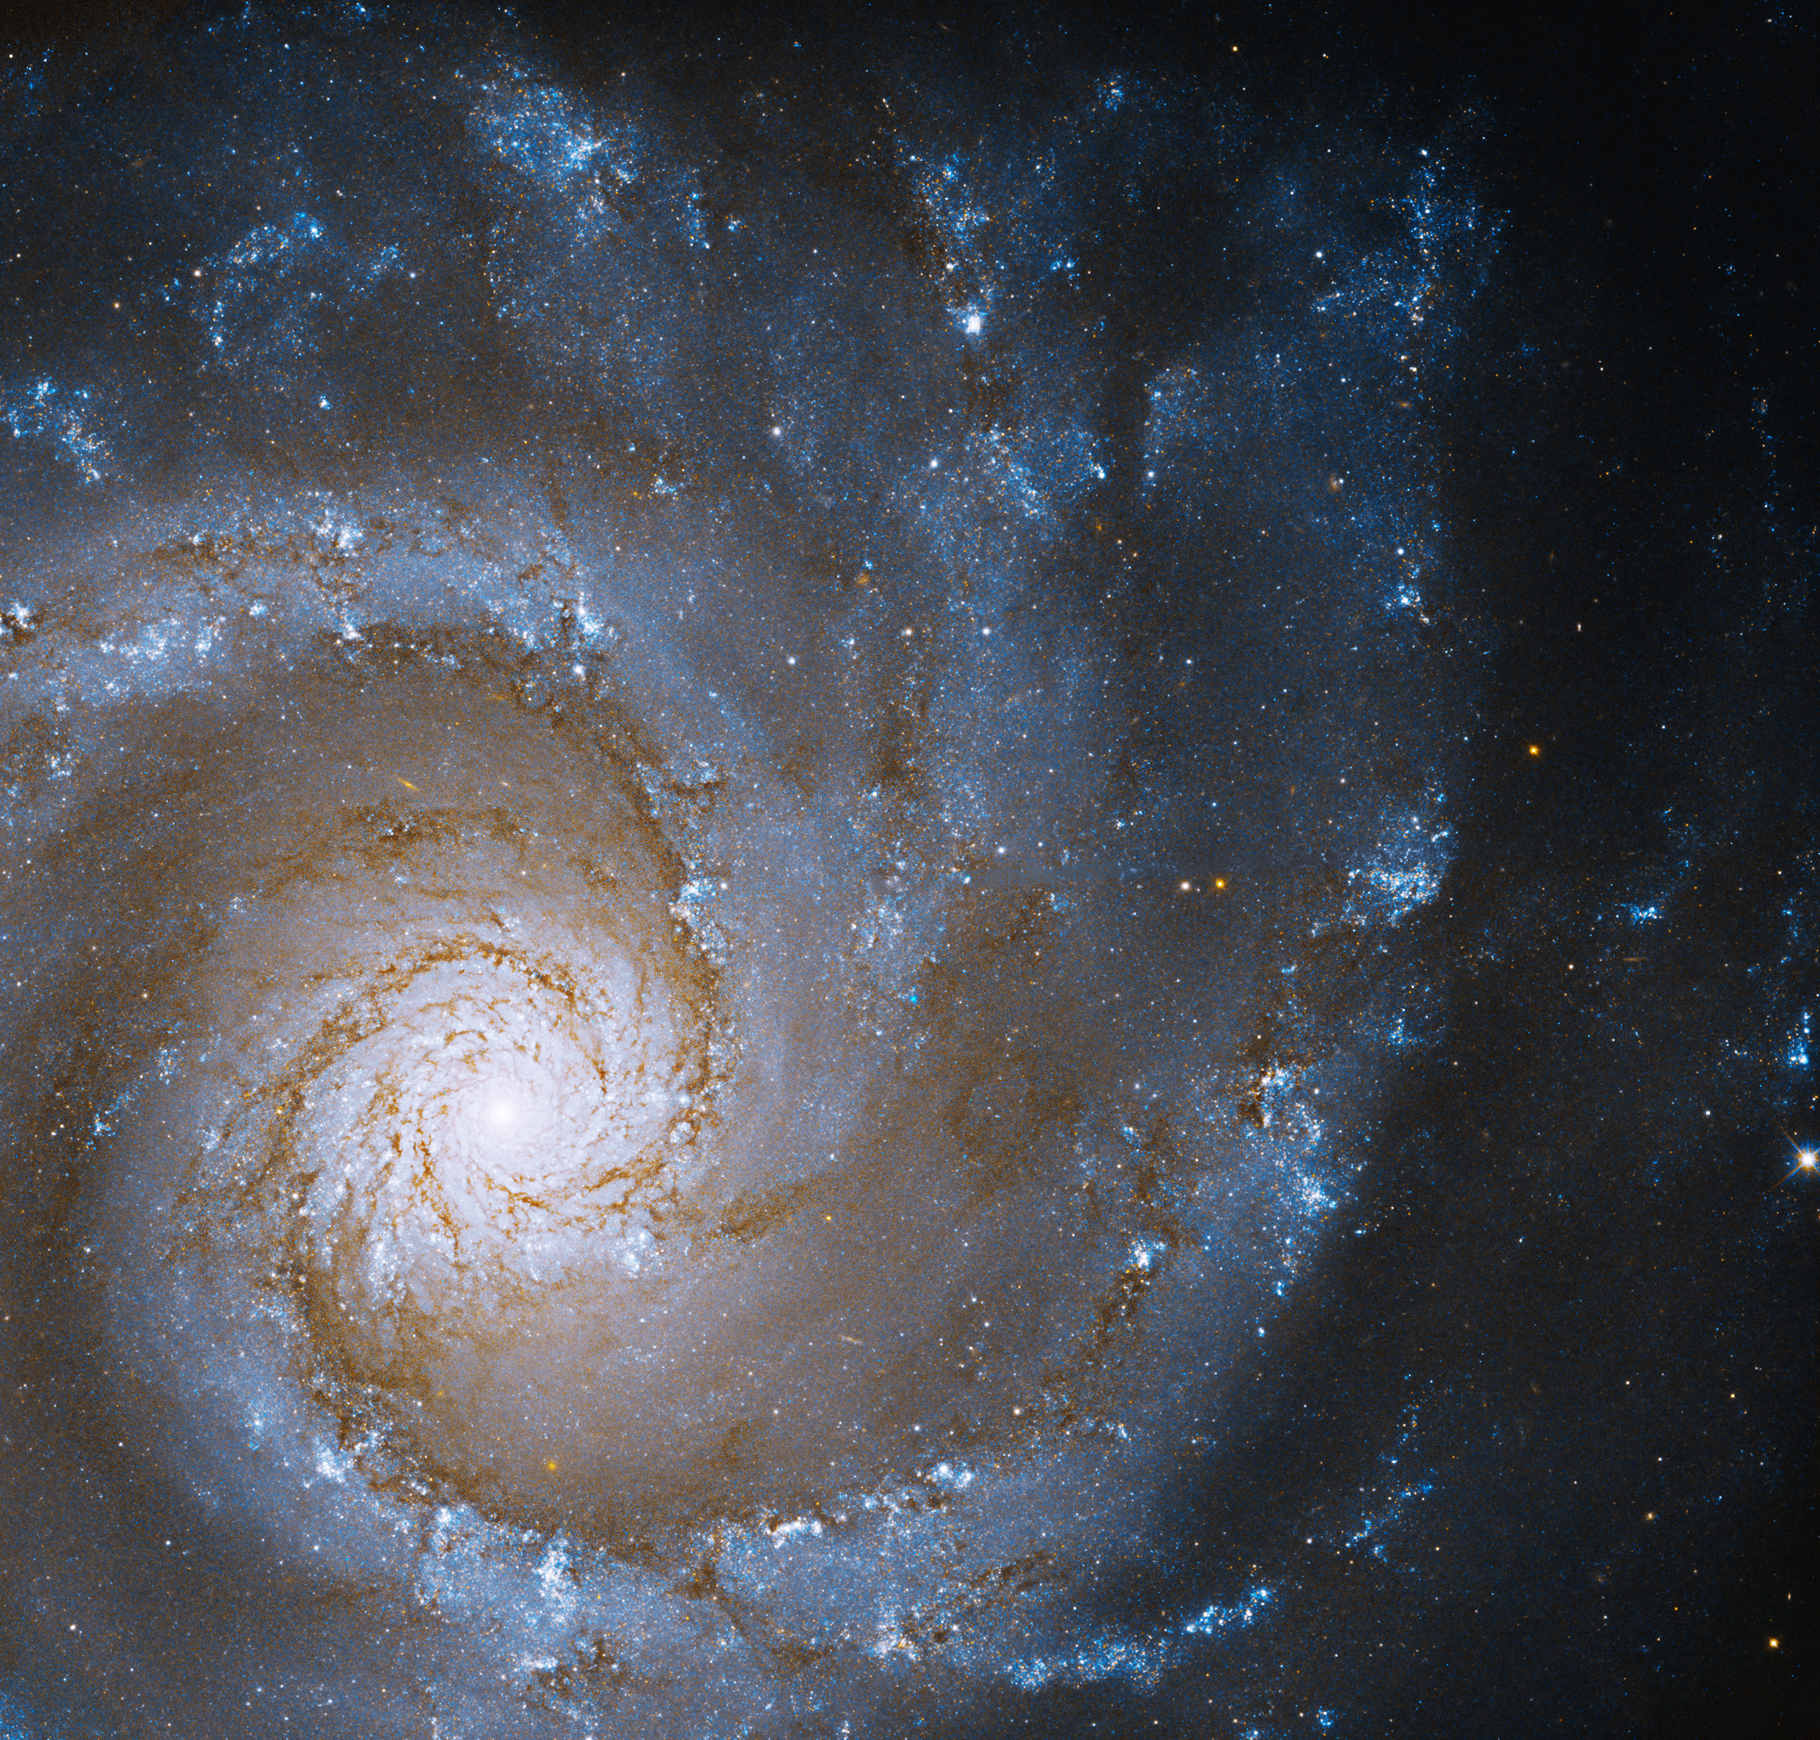 Hubble captures a perfectly formed Grand Design Spiral